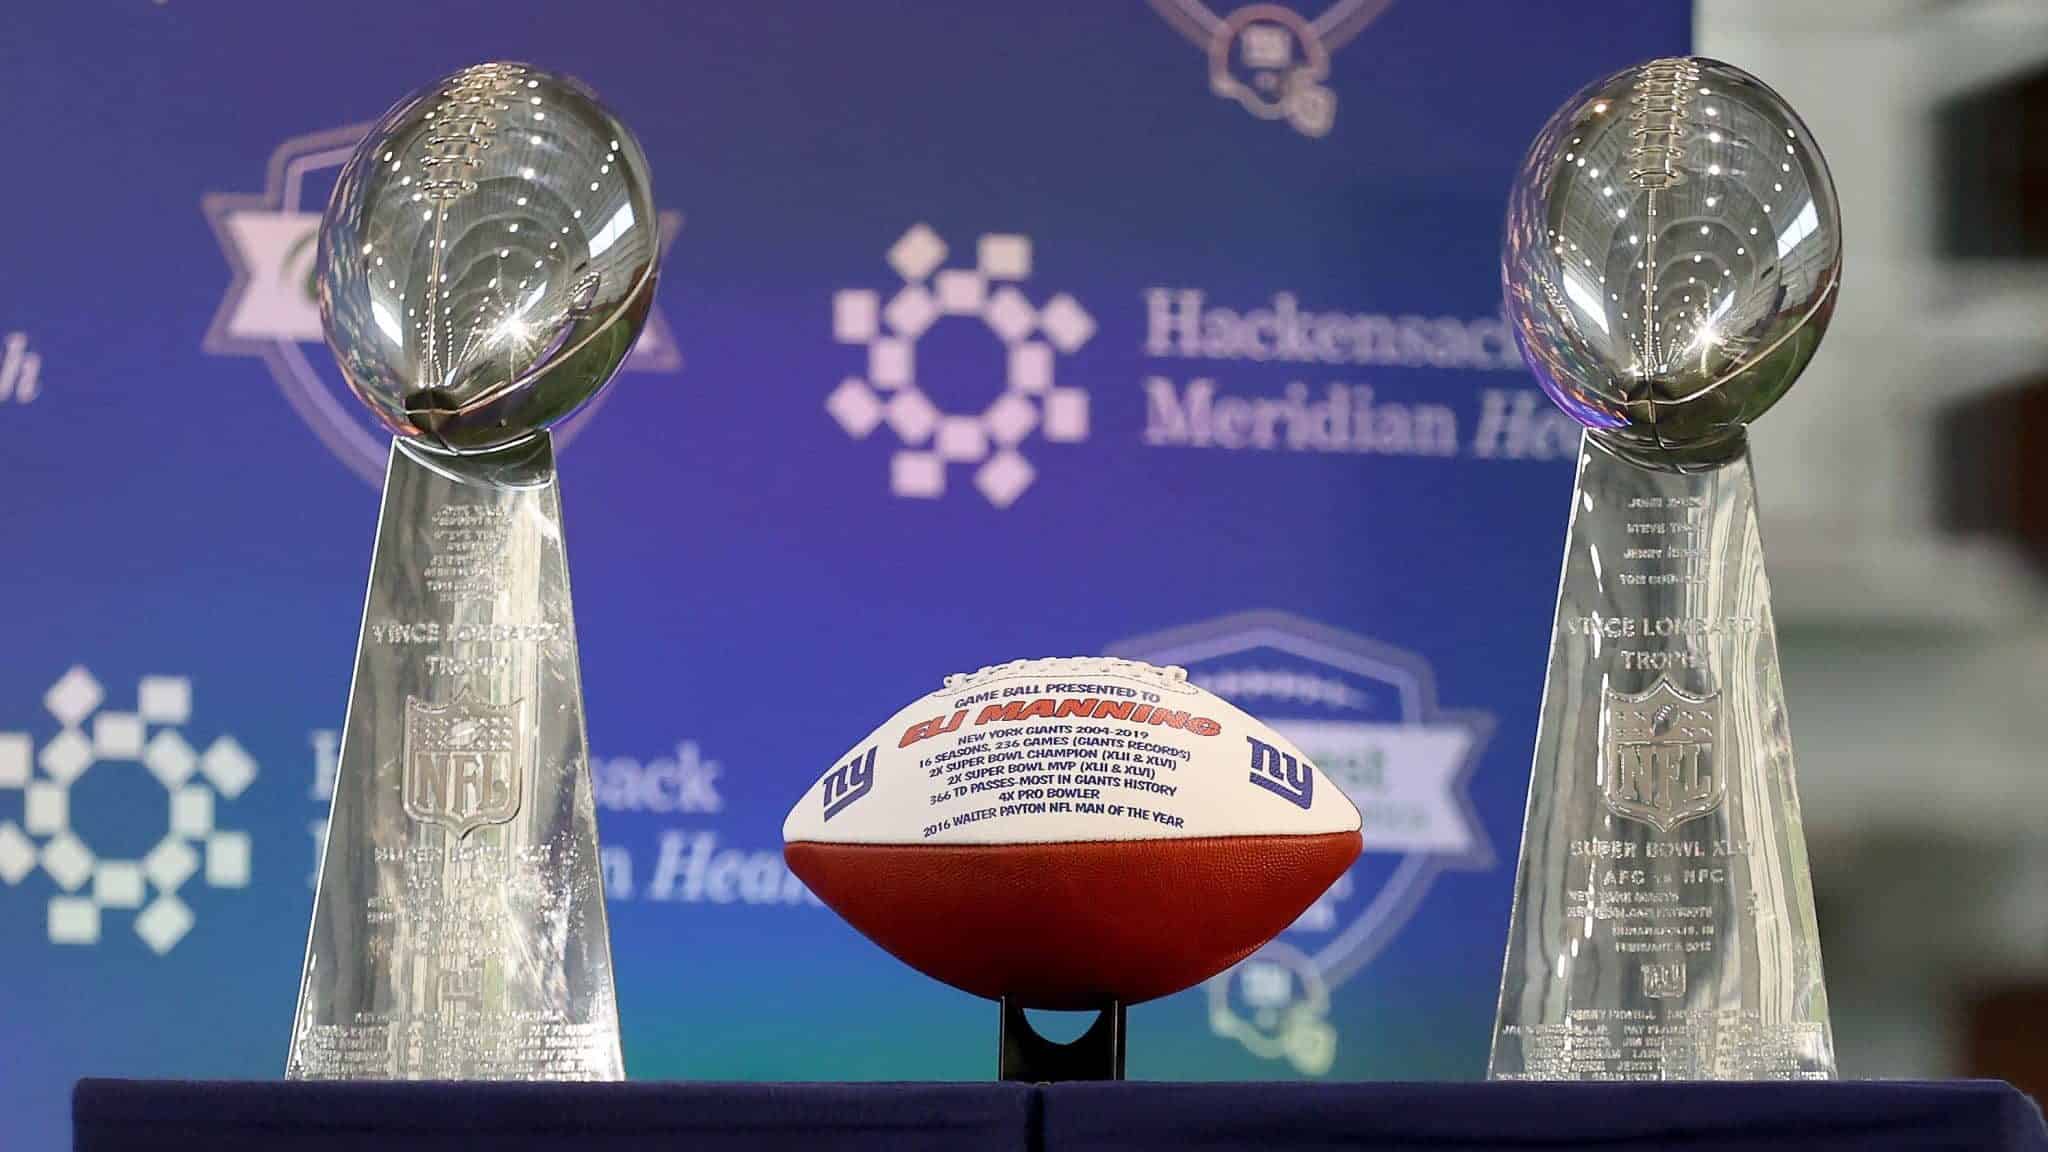 EAST RUTHERFORD, NEW JERSEY - JANUARY 24: A football listing all the accomplishments of Eli Manning of the New York Giants is on display with the Vince Lombardi trophies before Eli Manning announced his retirement during a press conference on January 24, 2020 at Quest Diagnostic Training Center in East Rutherford, New Jersey.The two time Super Bowl MVP is retiring after 16 seasons with the team.